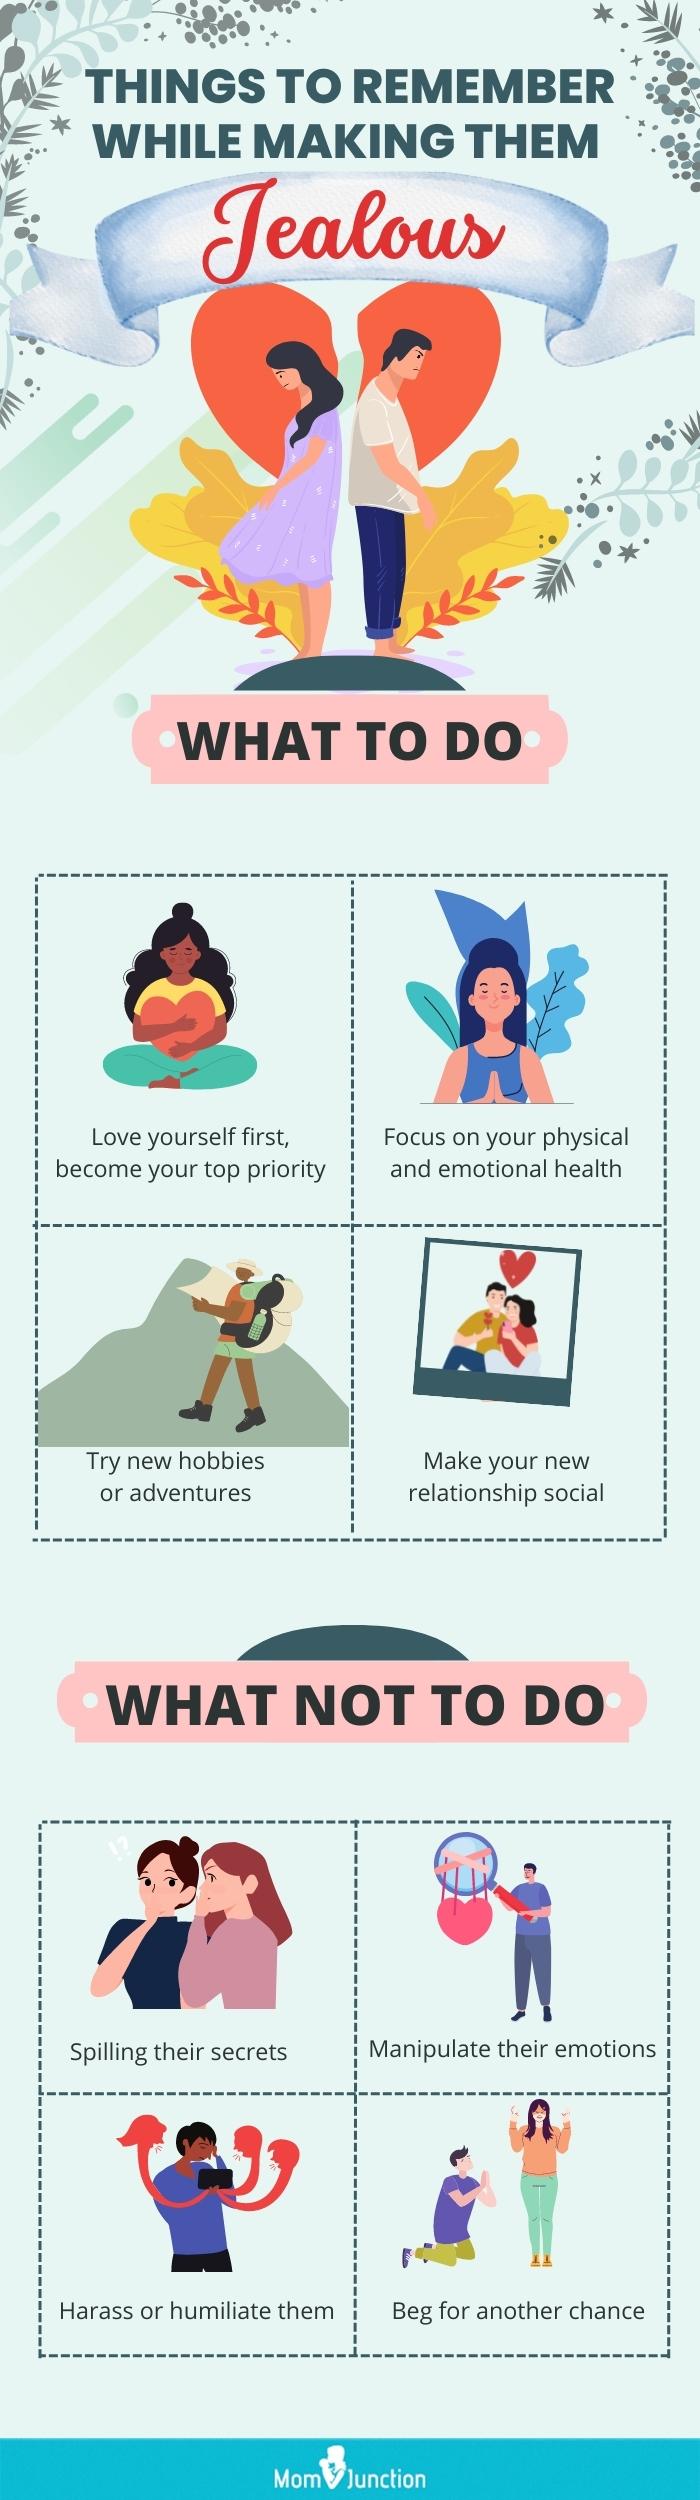 things to remember while making them jealous (infographic)